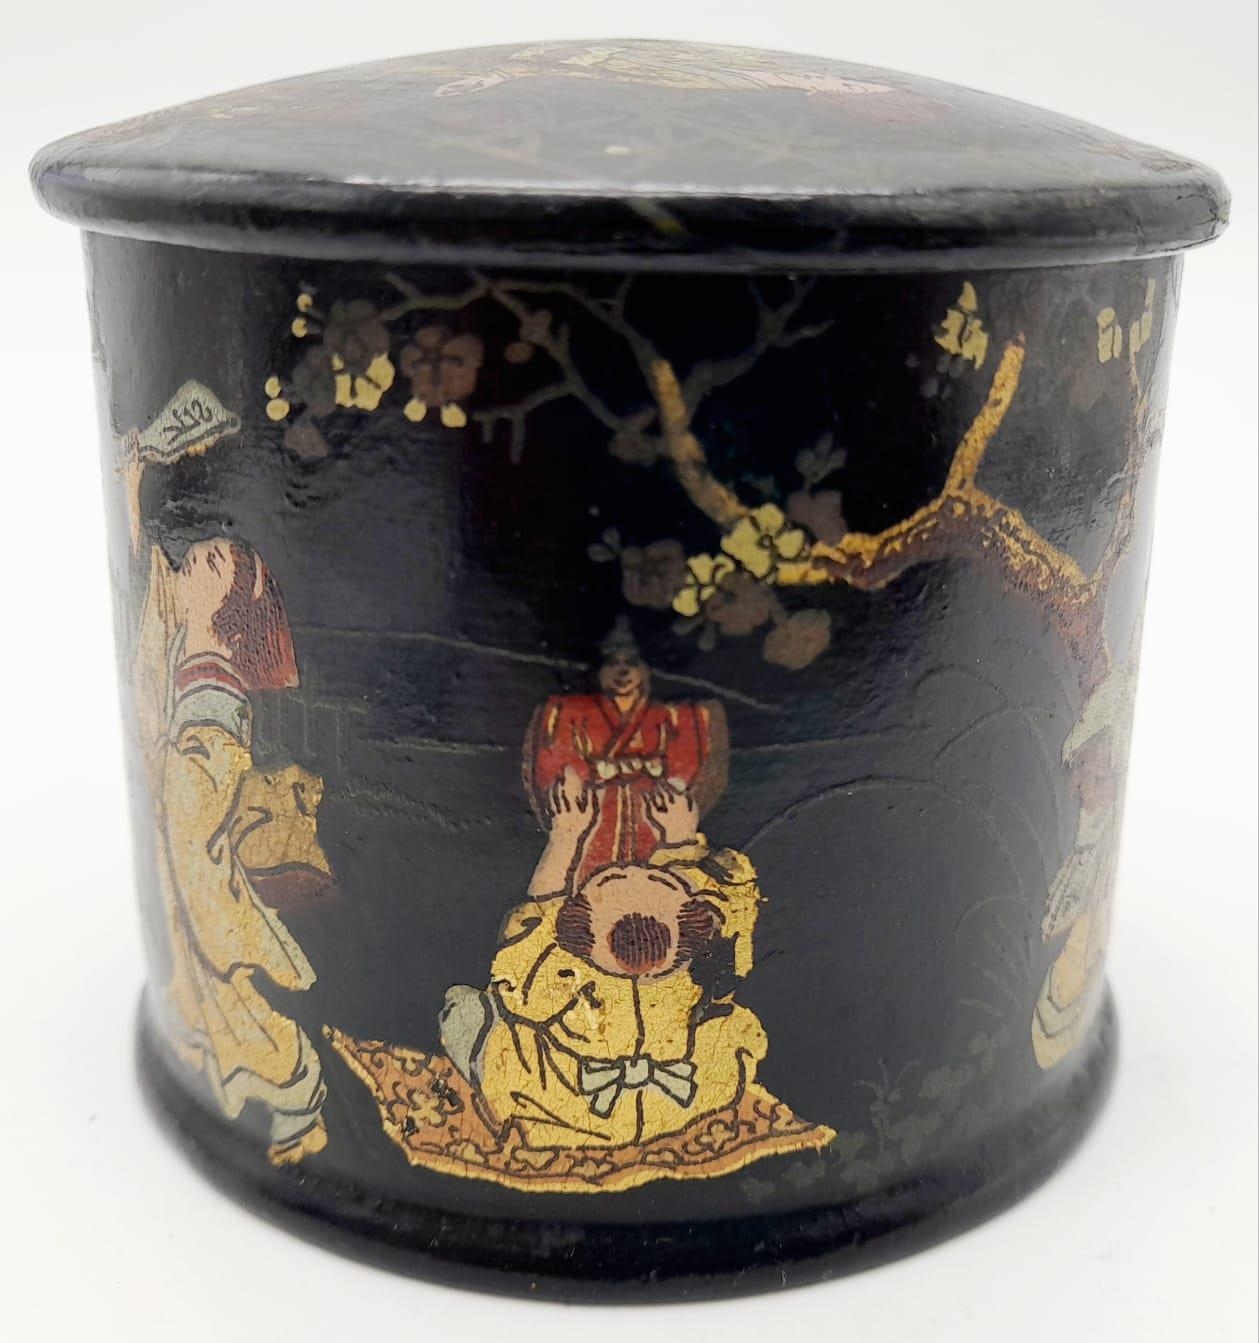 An Antique Chinese Black Lacquer Box. Wonderful decoration with gold on black depicting Mothers at - Image 6 of 7